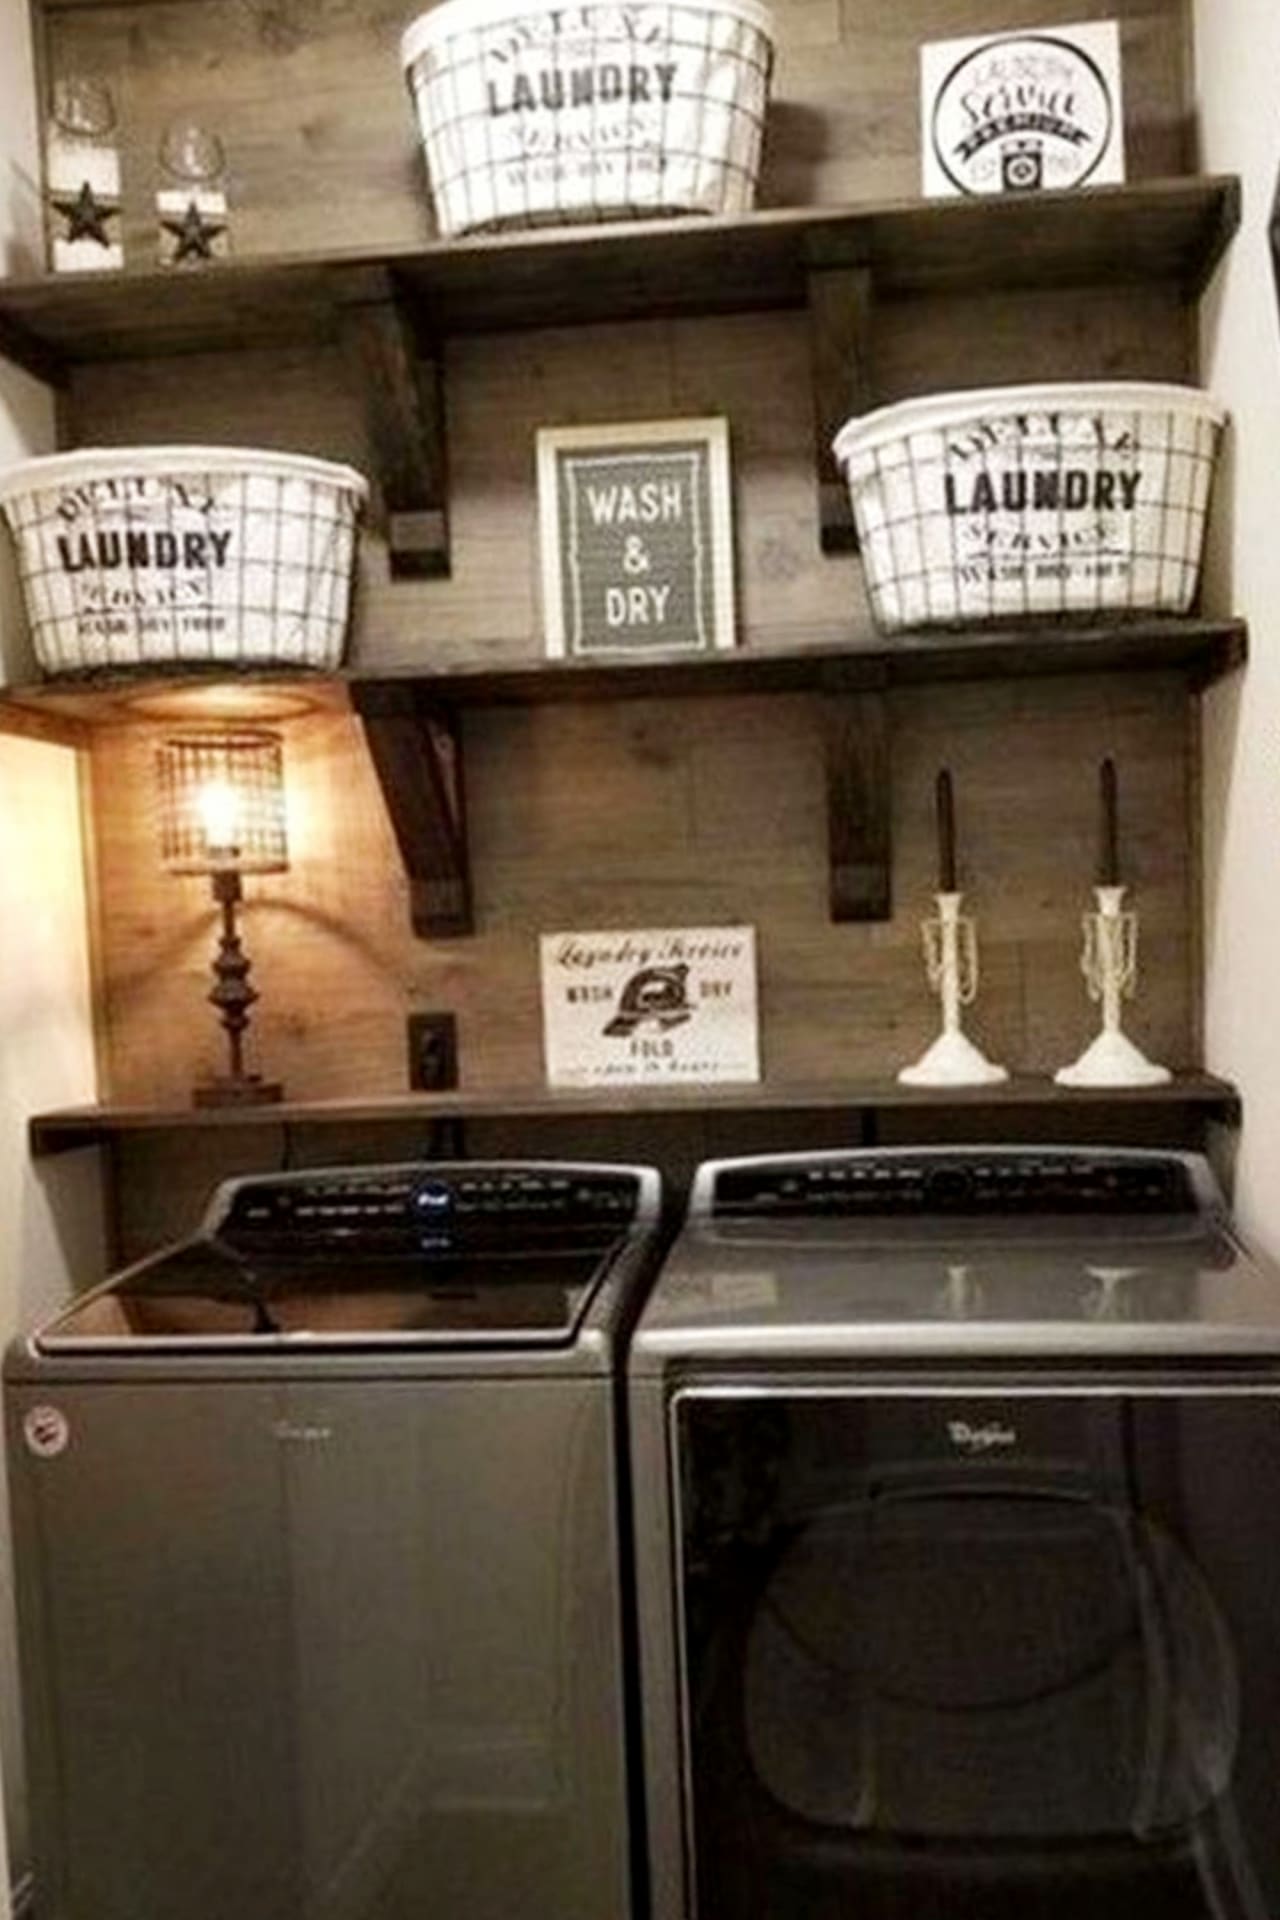 Small laundry room ideas - farmhouse laundry room decorating ideas for the home - farmhouse rustic laundry room ideas, laundry area design and laundry nook ideas for a laundry closet or basement laundry room.  Farmhouse laundry room decor, laundry room lighting, laundry room storage and organization ideas and laundry room signs for decorating a small laundry room on a budget or a cheap DIY laundry room remodel